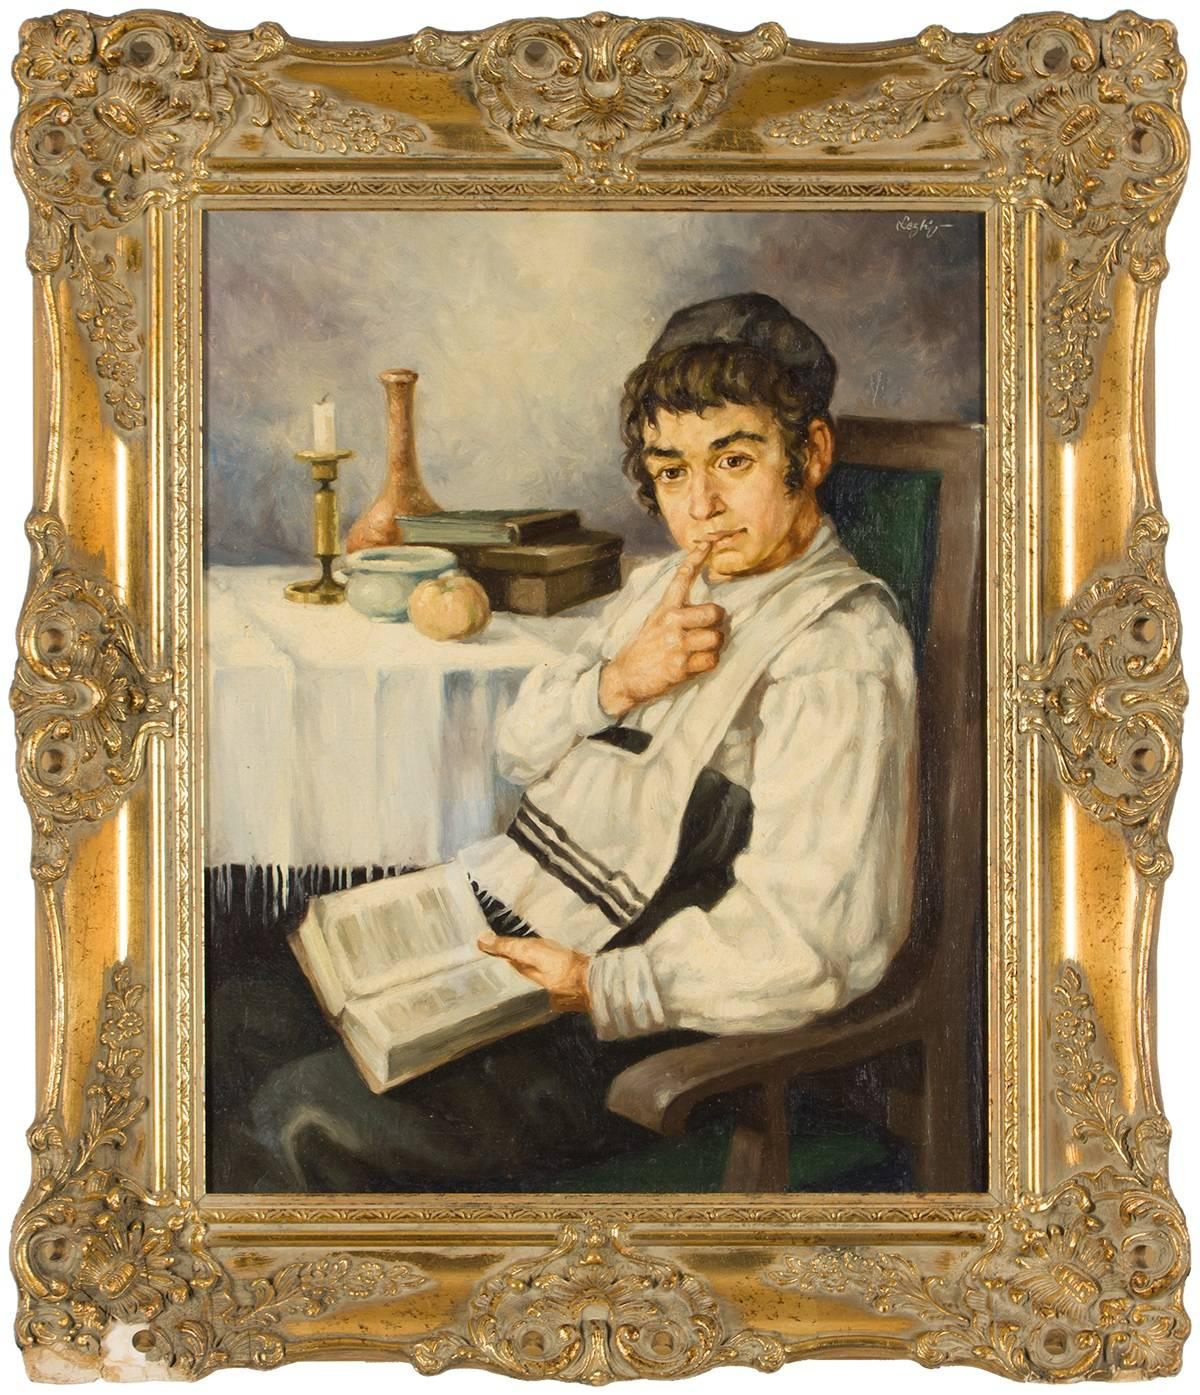 Unknown Figurative Painting - Cheder Boy (Contemplative jewish Boy) Hungarian Judaica Painting